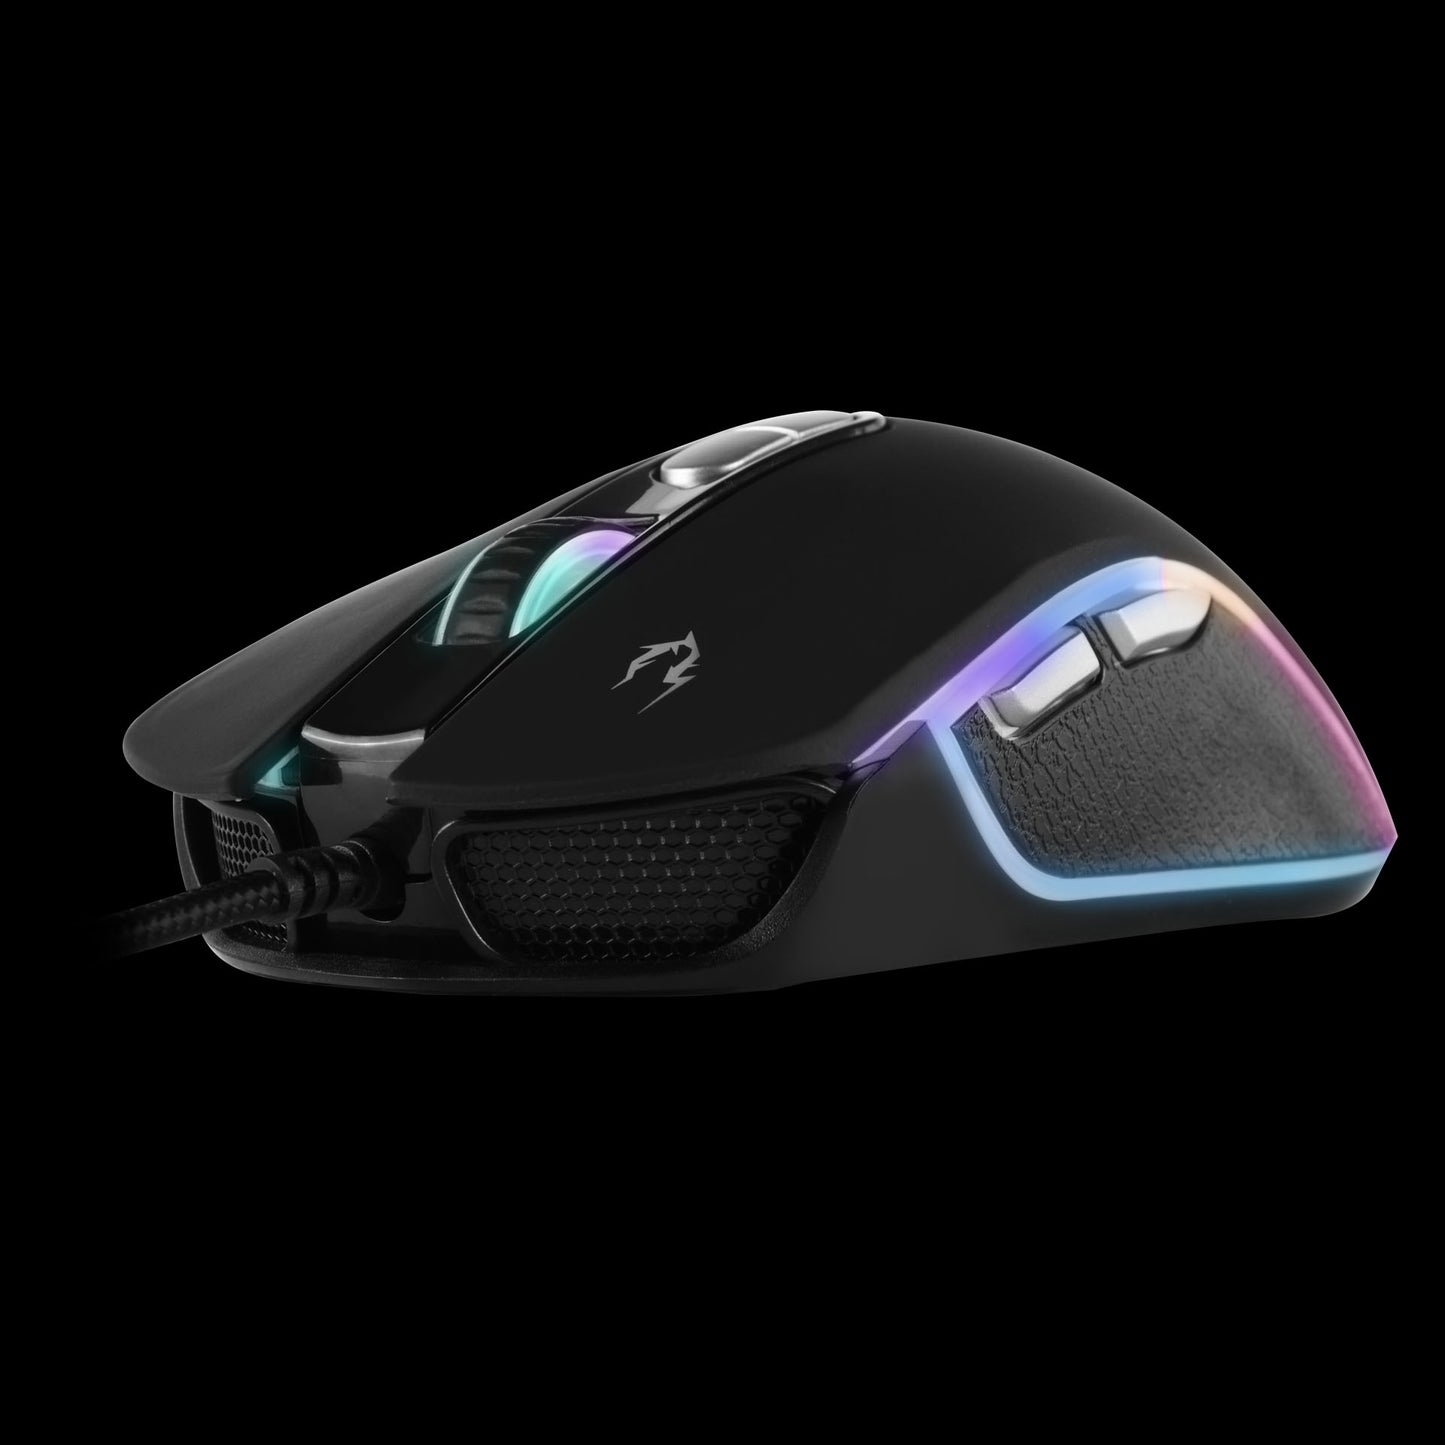 Gamdias Zeus M3 RGB Wired Gaming Mouse with Mousepad